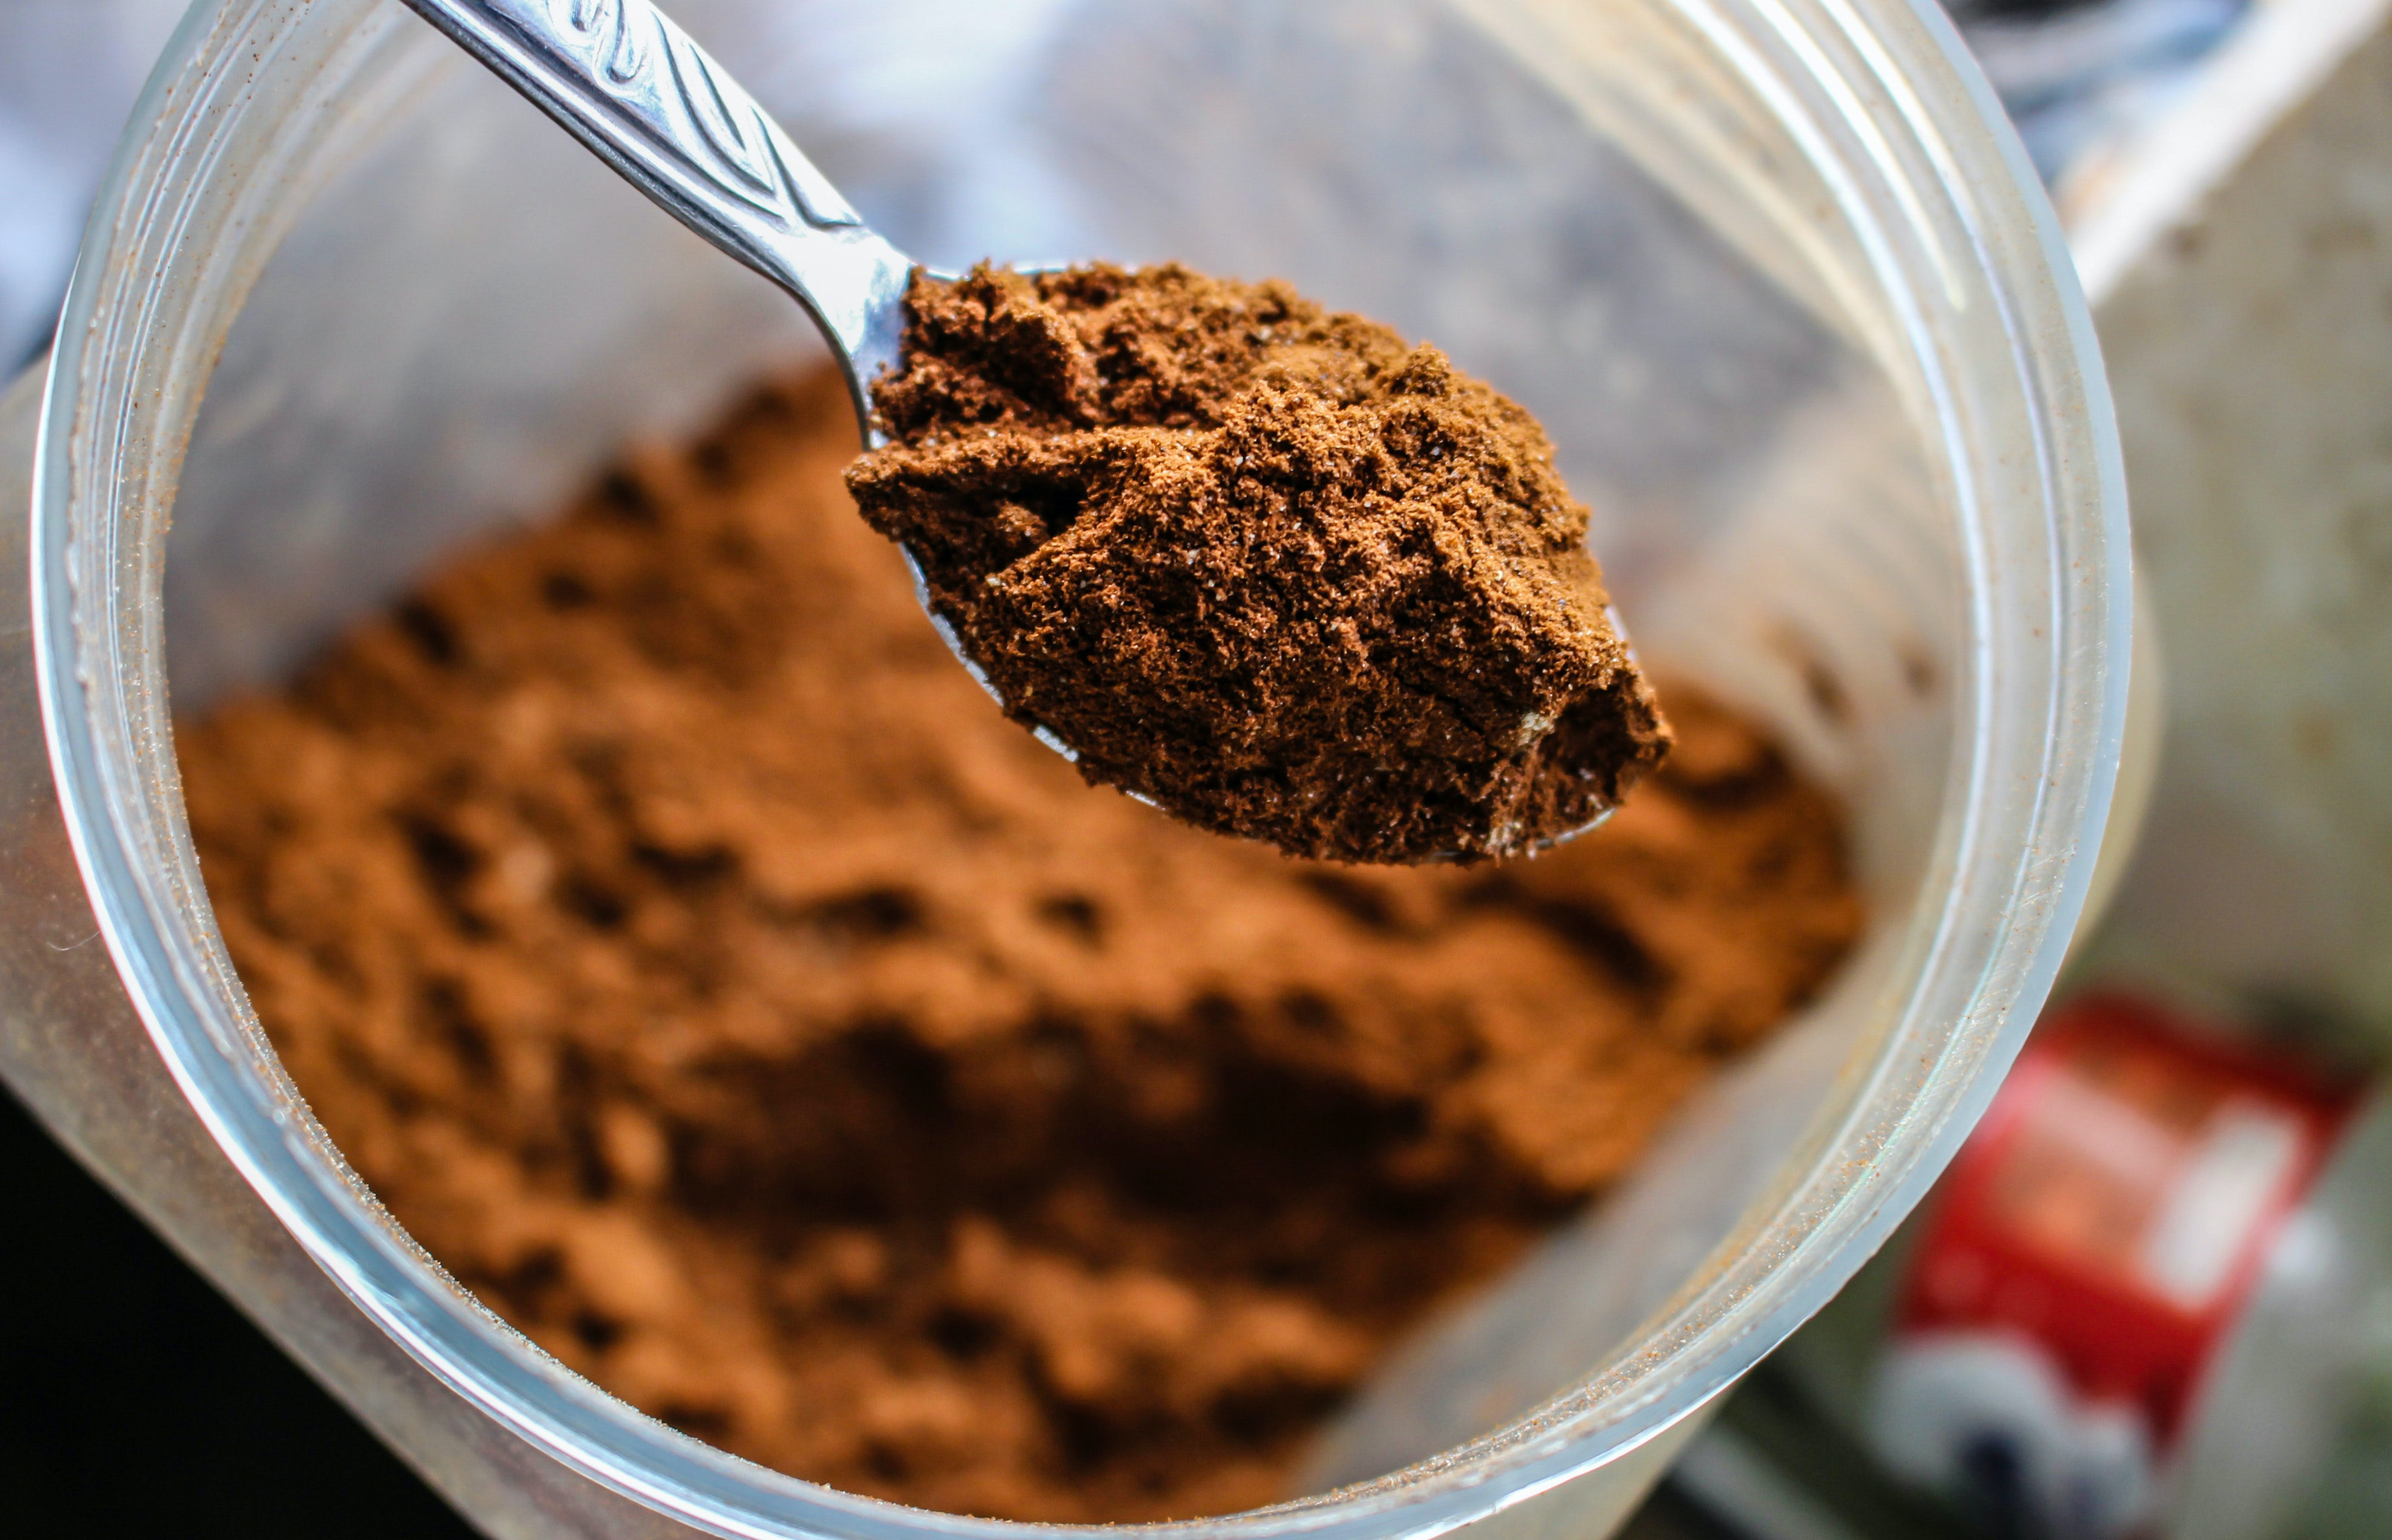 an image of cocoa powder in a clear container with a spoon holding some